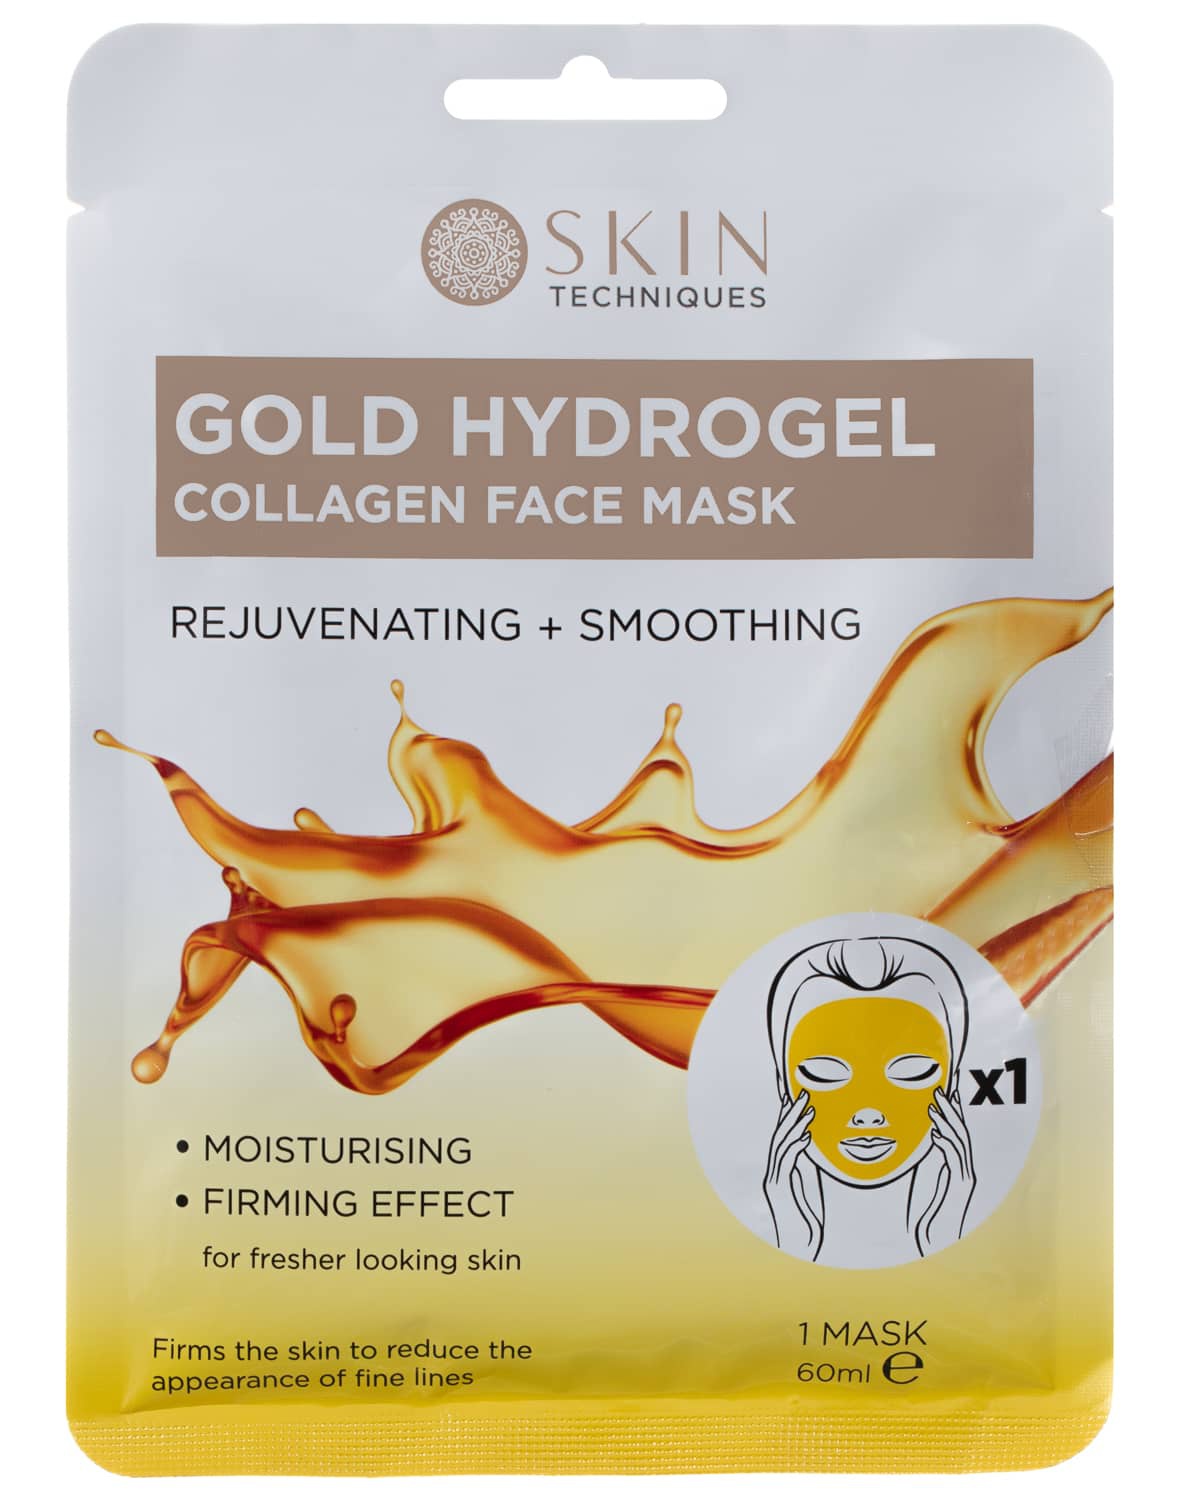 Skin techniques Gold Hydrogel Collagen Face Mask